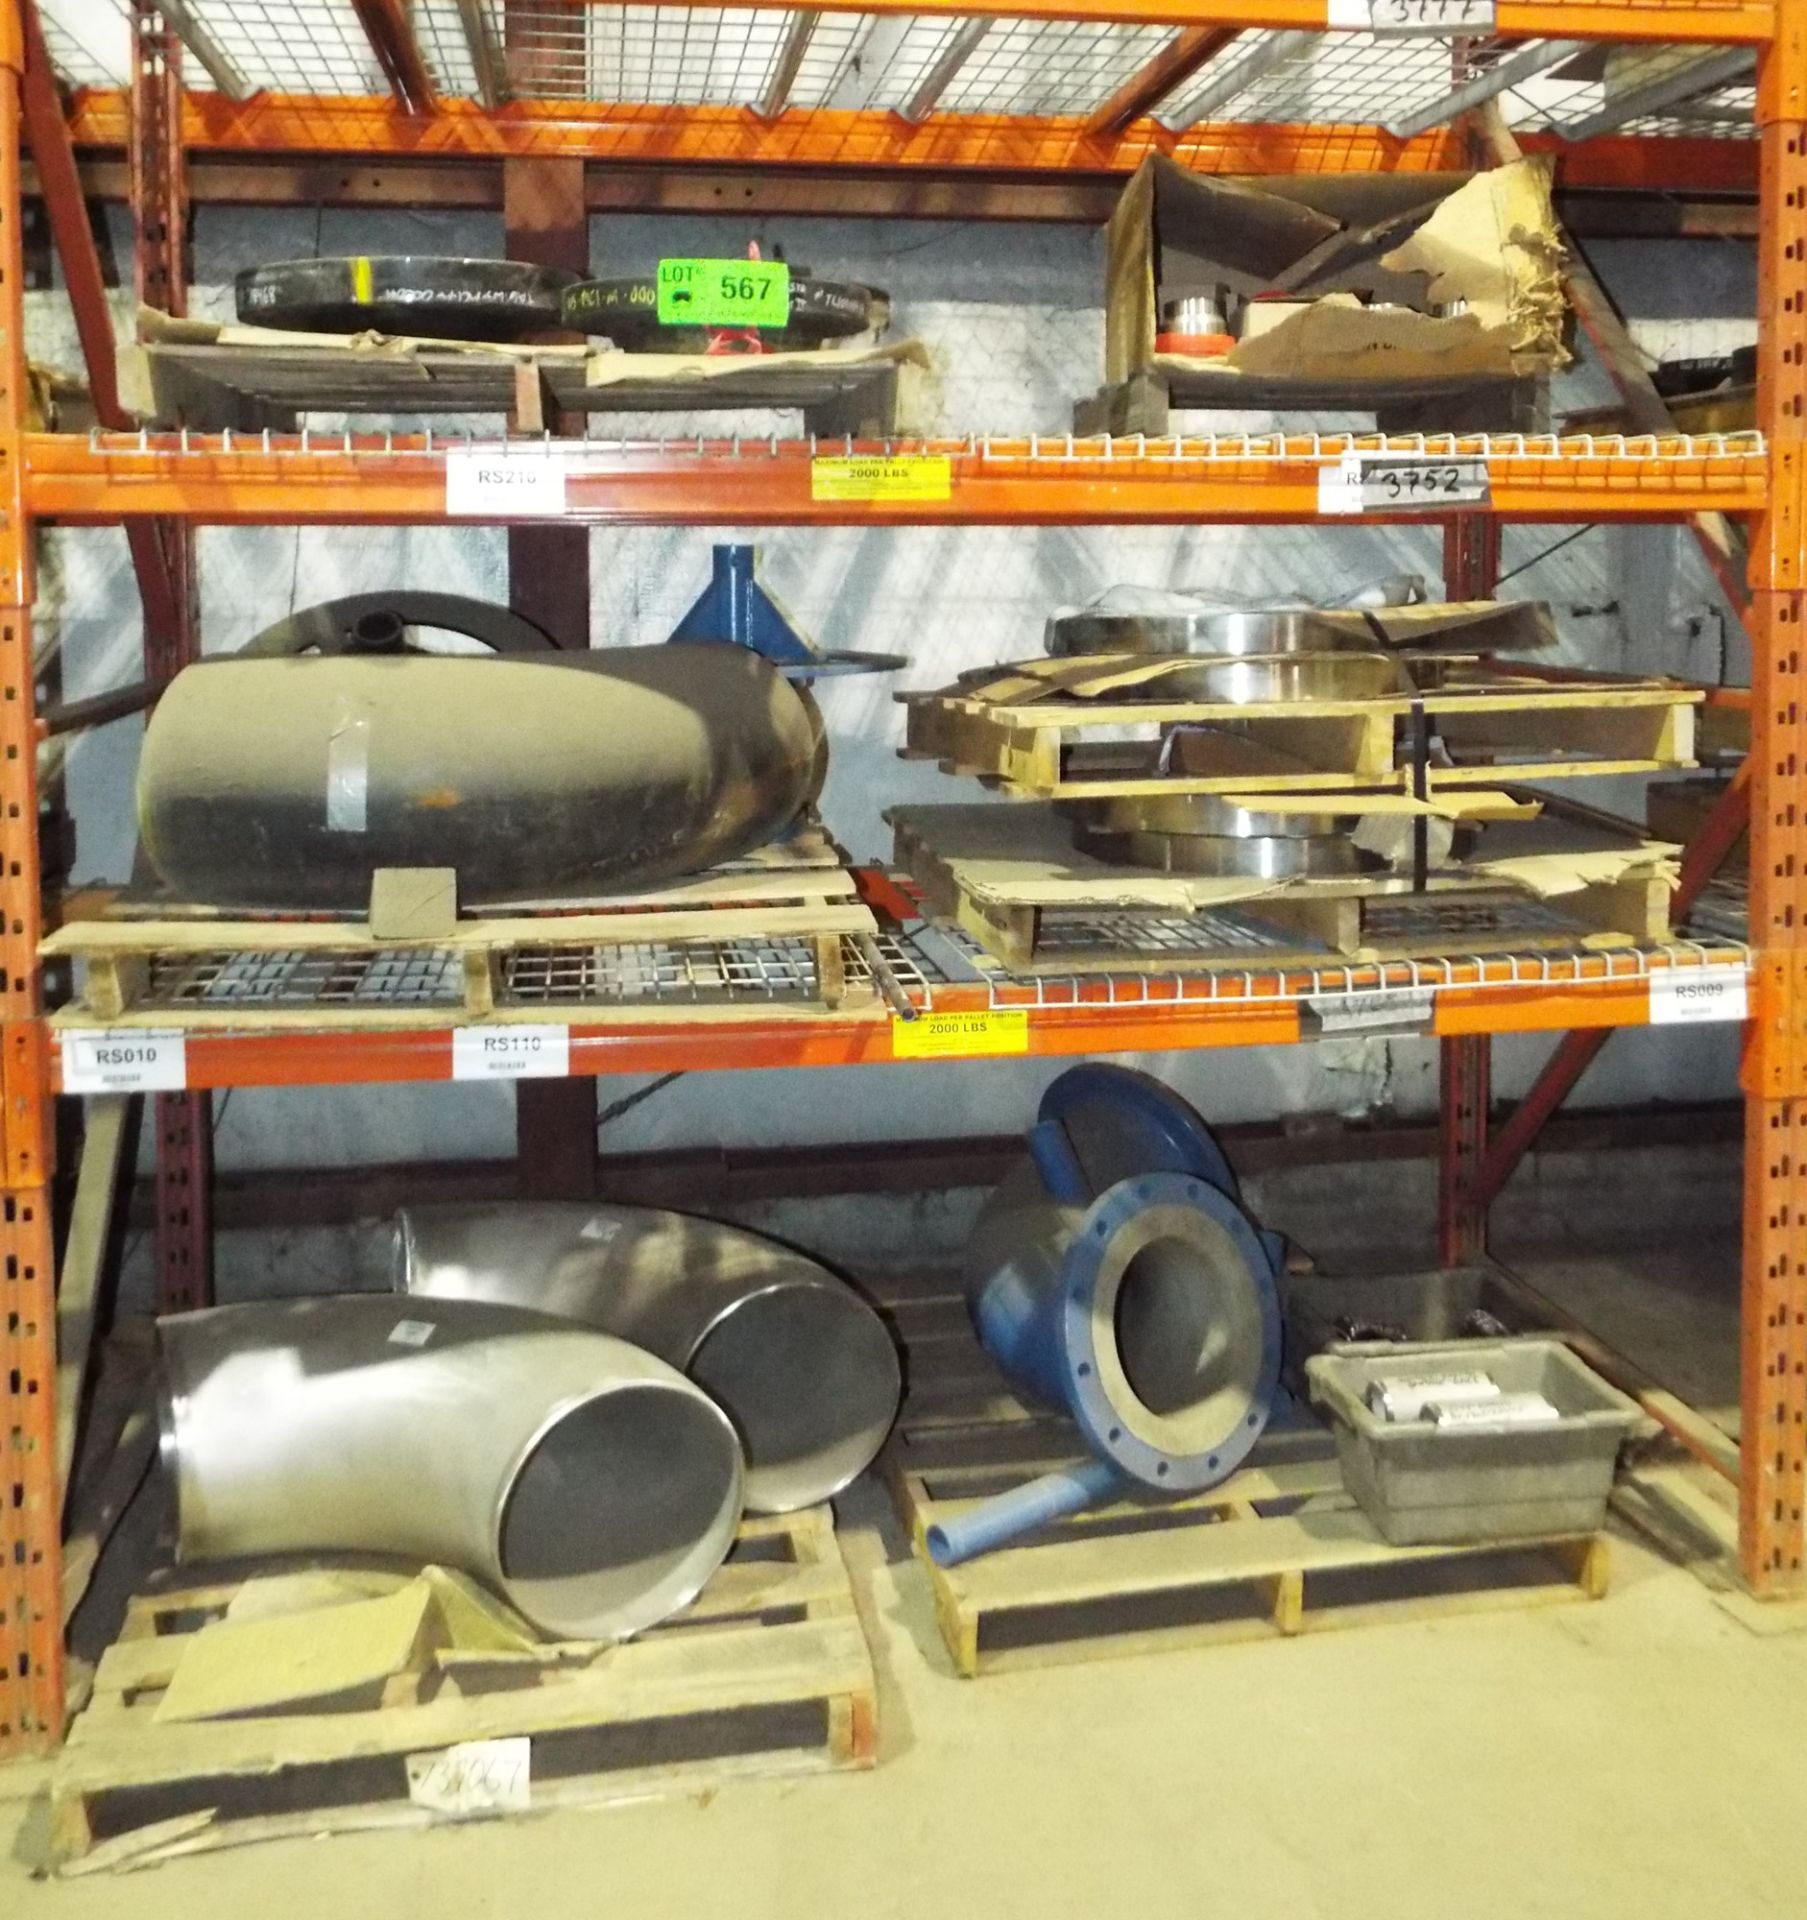 LOT/ CONTENTS OF RACK INCLUDING PIPES AND PIPE FITTING HARDWARE